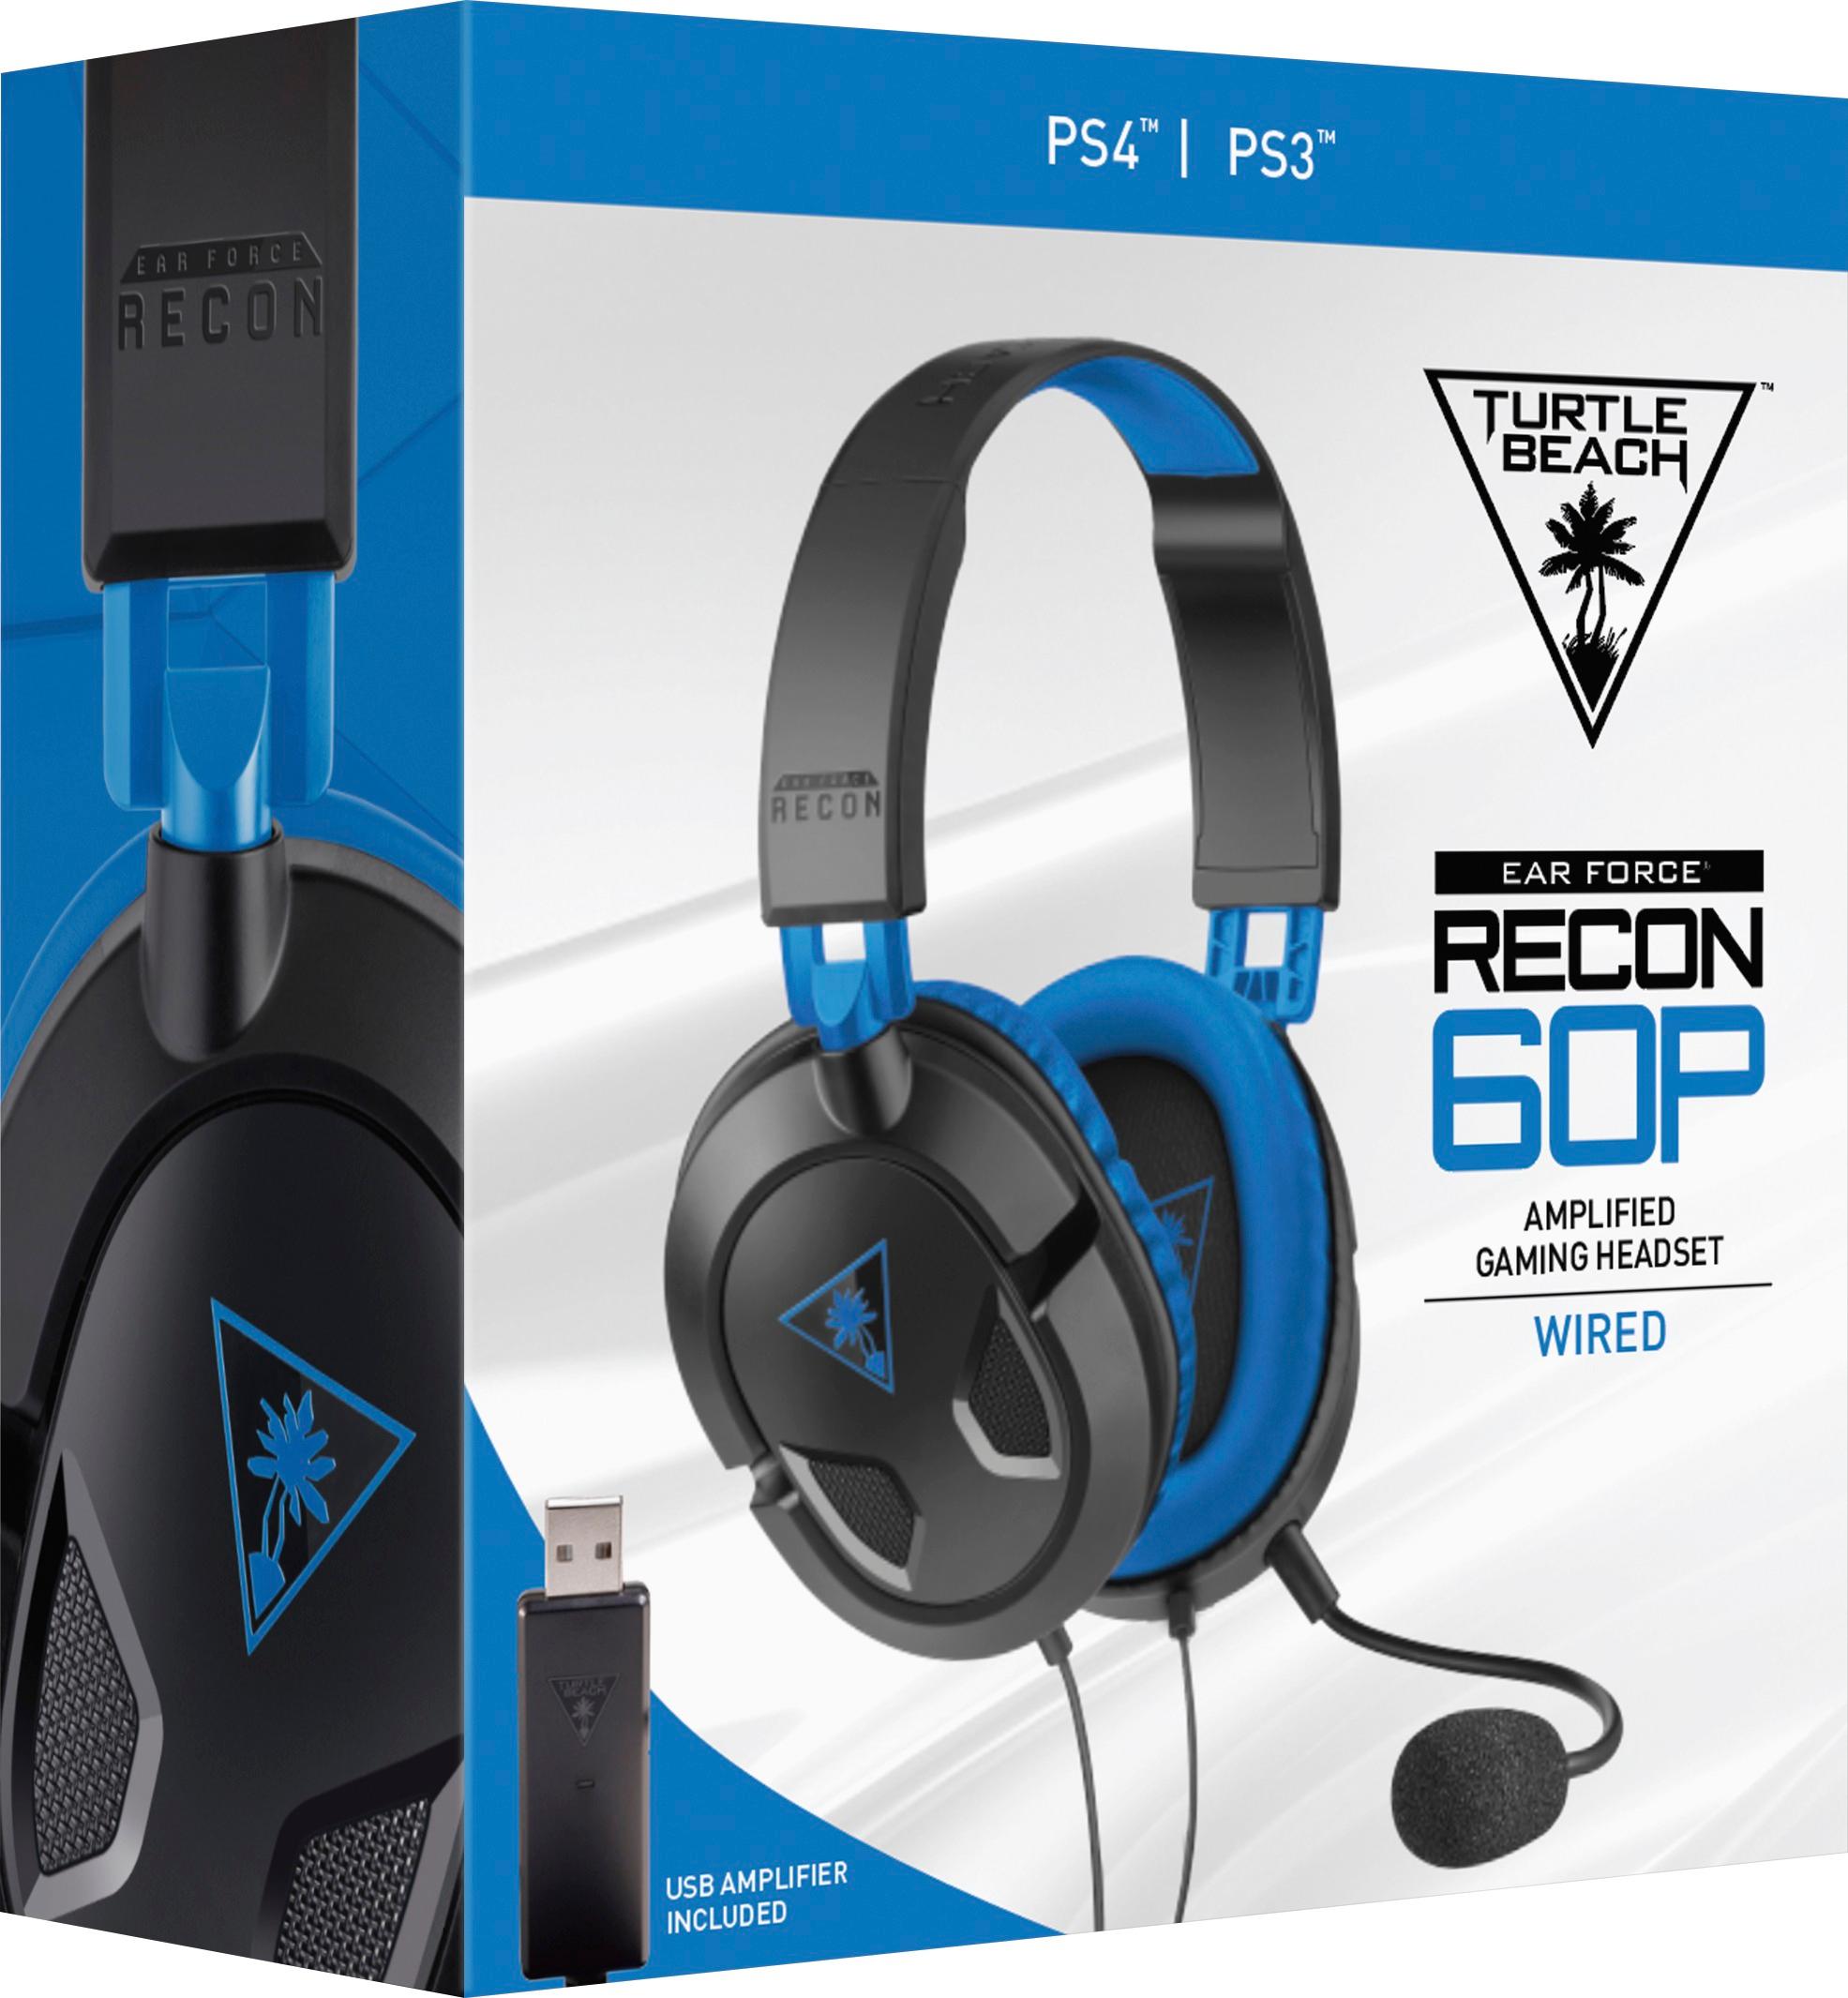 wired turtle beach ps4